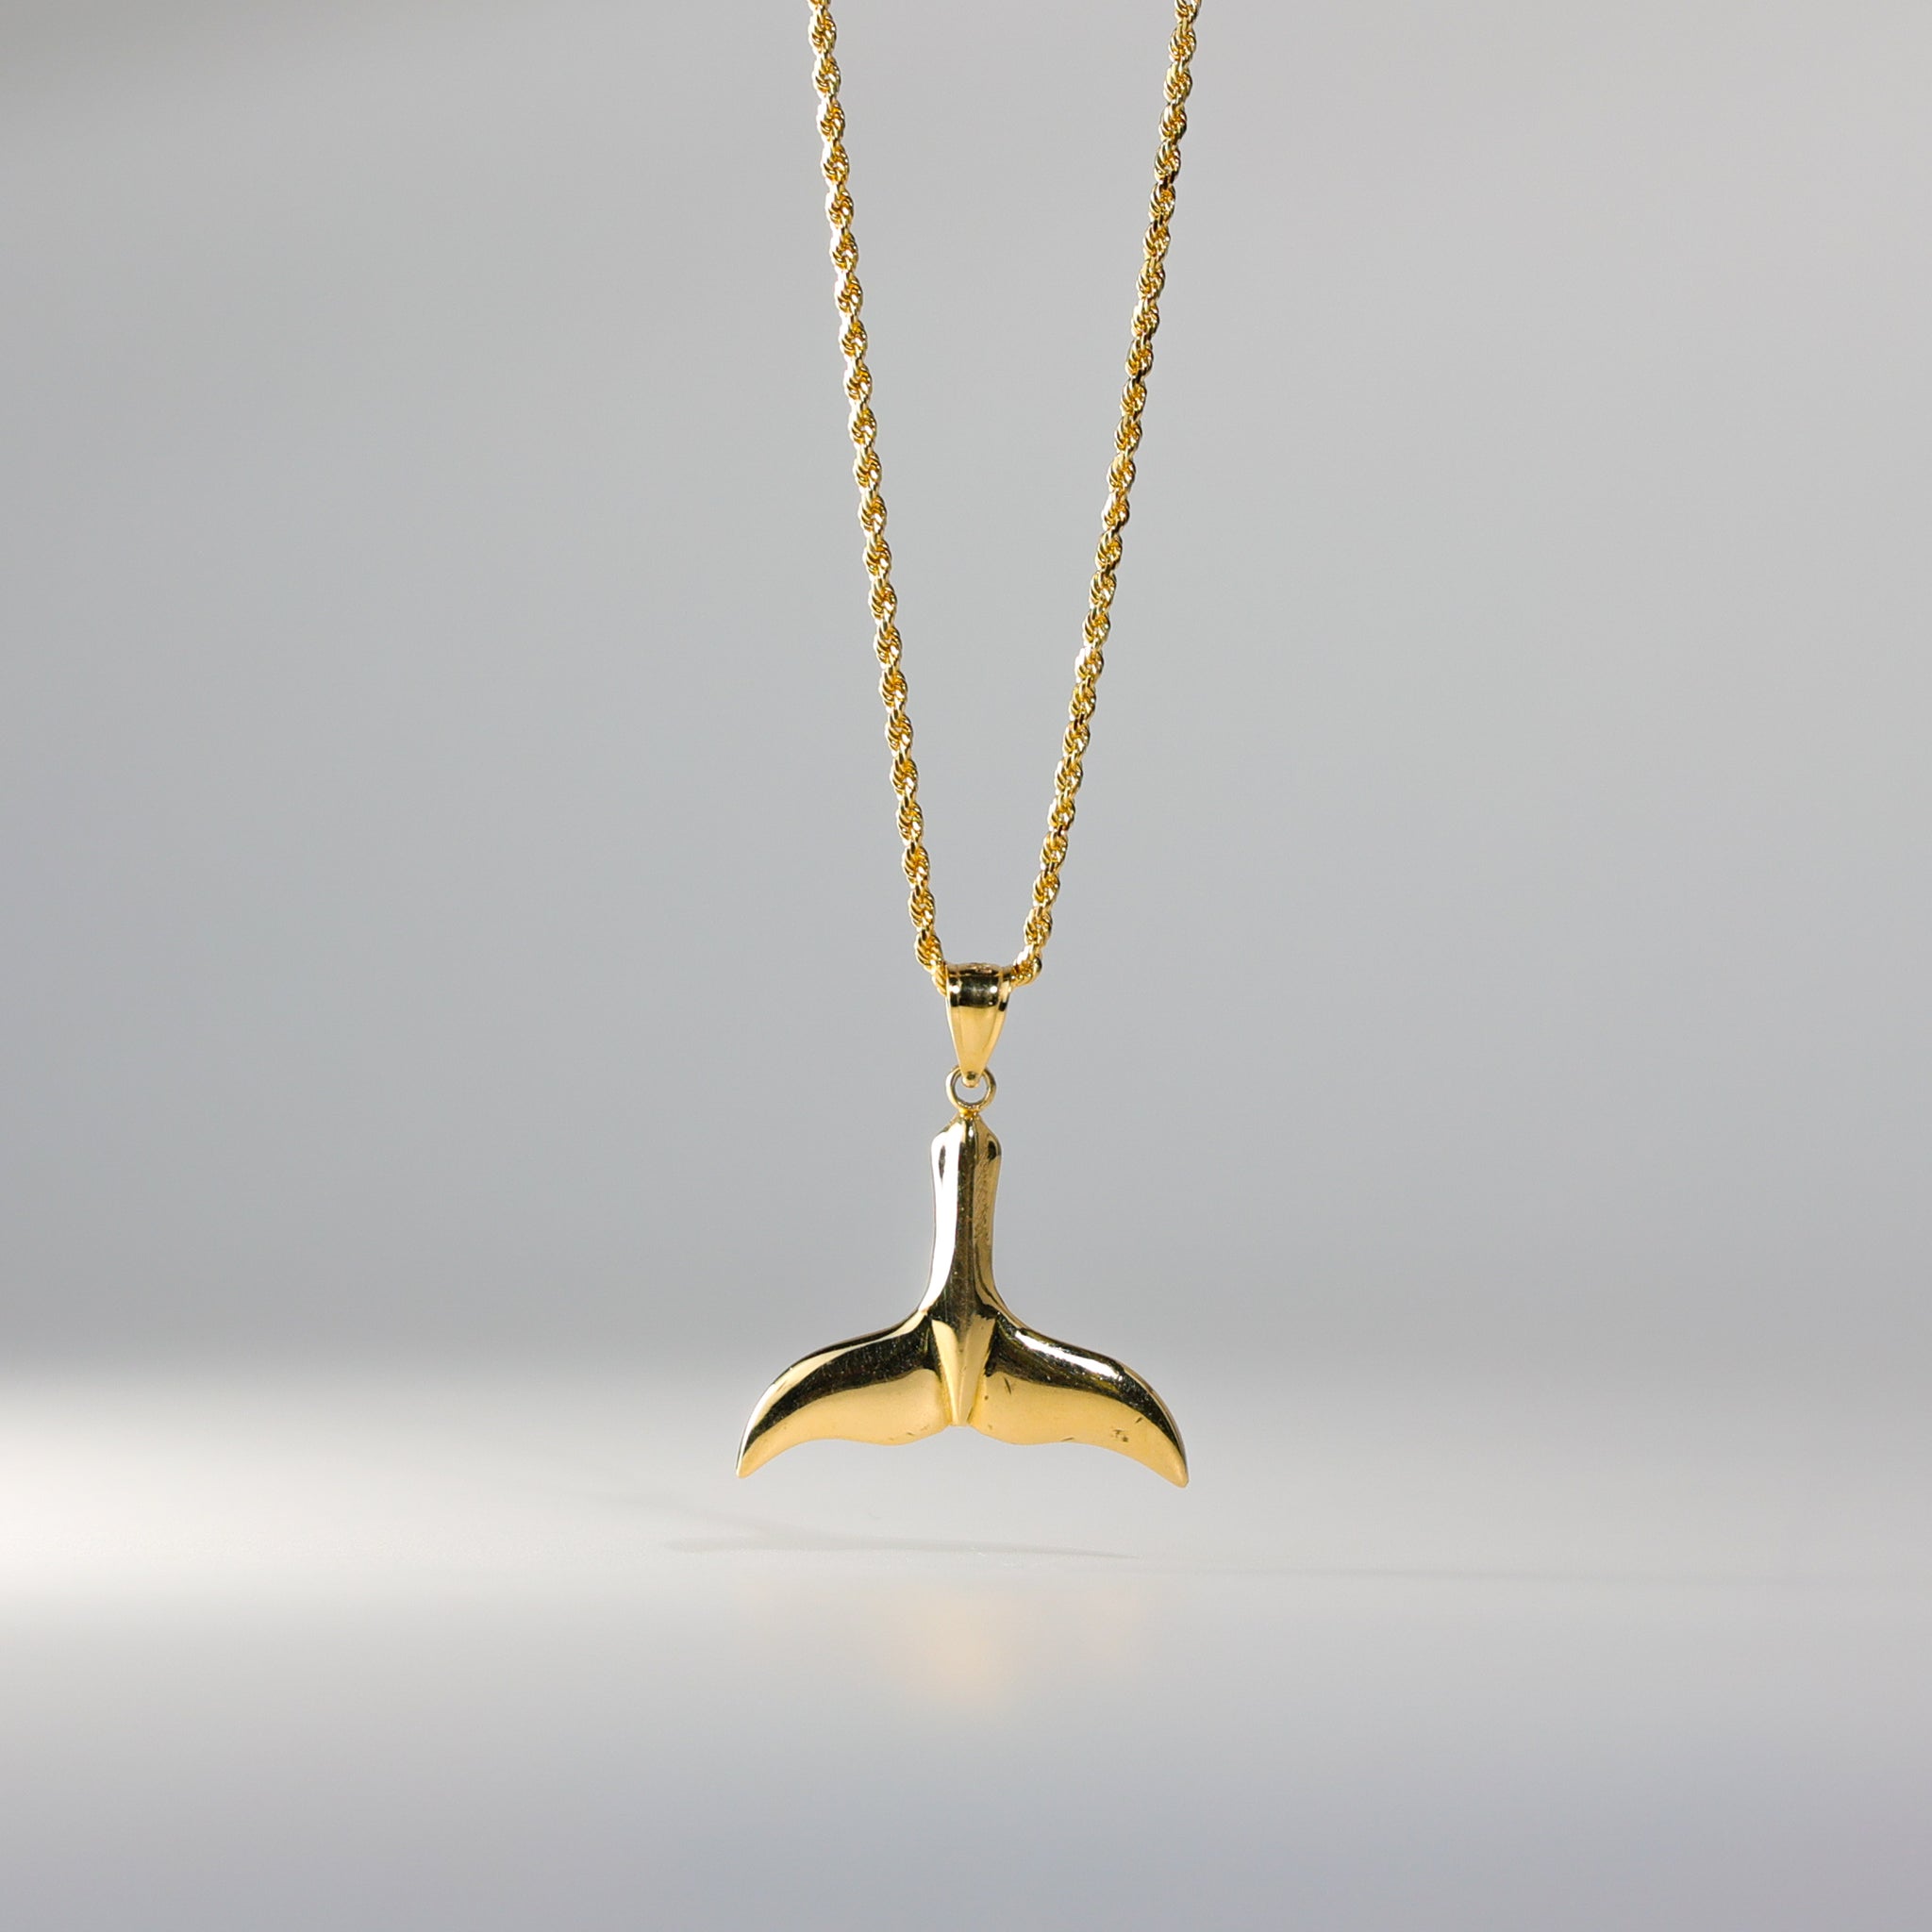 Gold Tail of Dolphin Pendant Model-1690 - Charlie & Co. Jewelry